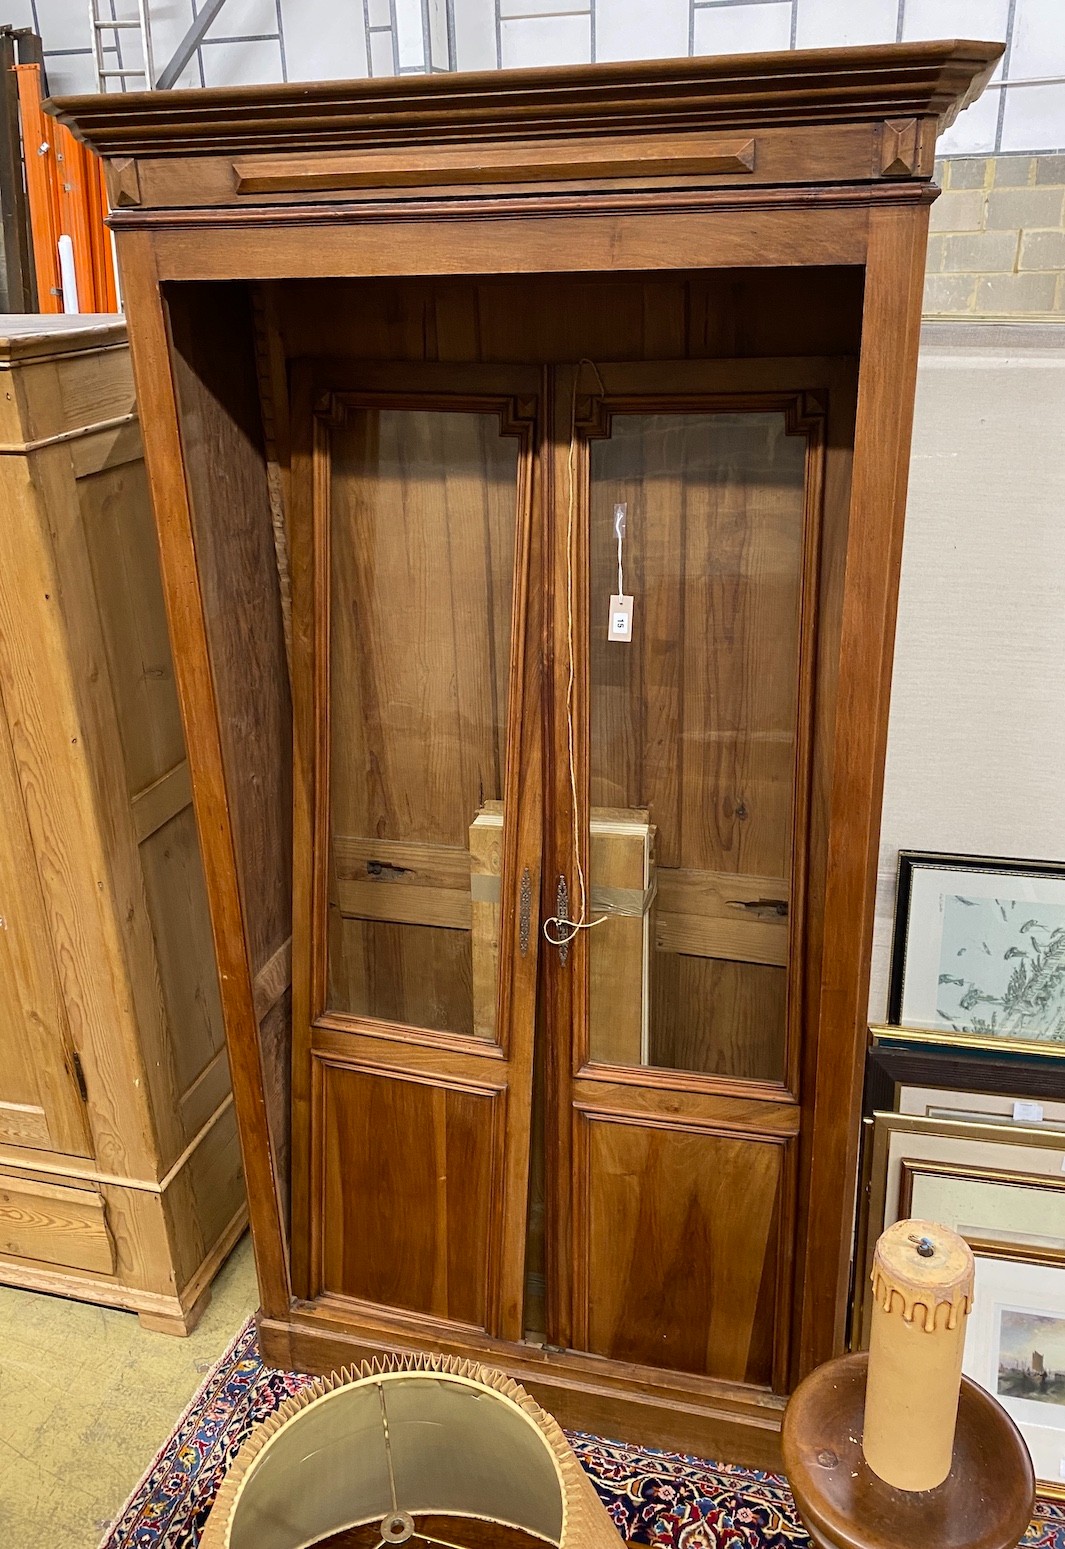 An early 20th century French glazed cherry two door bookcase, width 116cm, depth 48cm, height 212cm